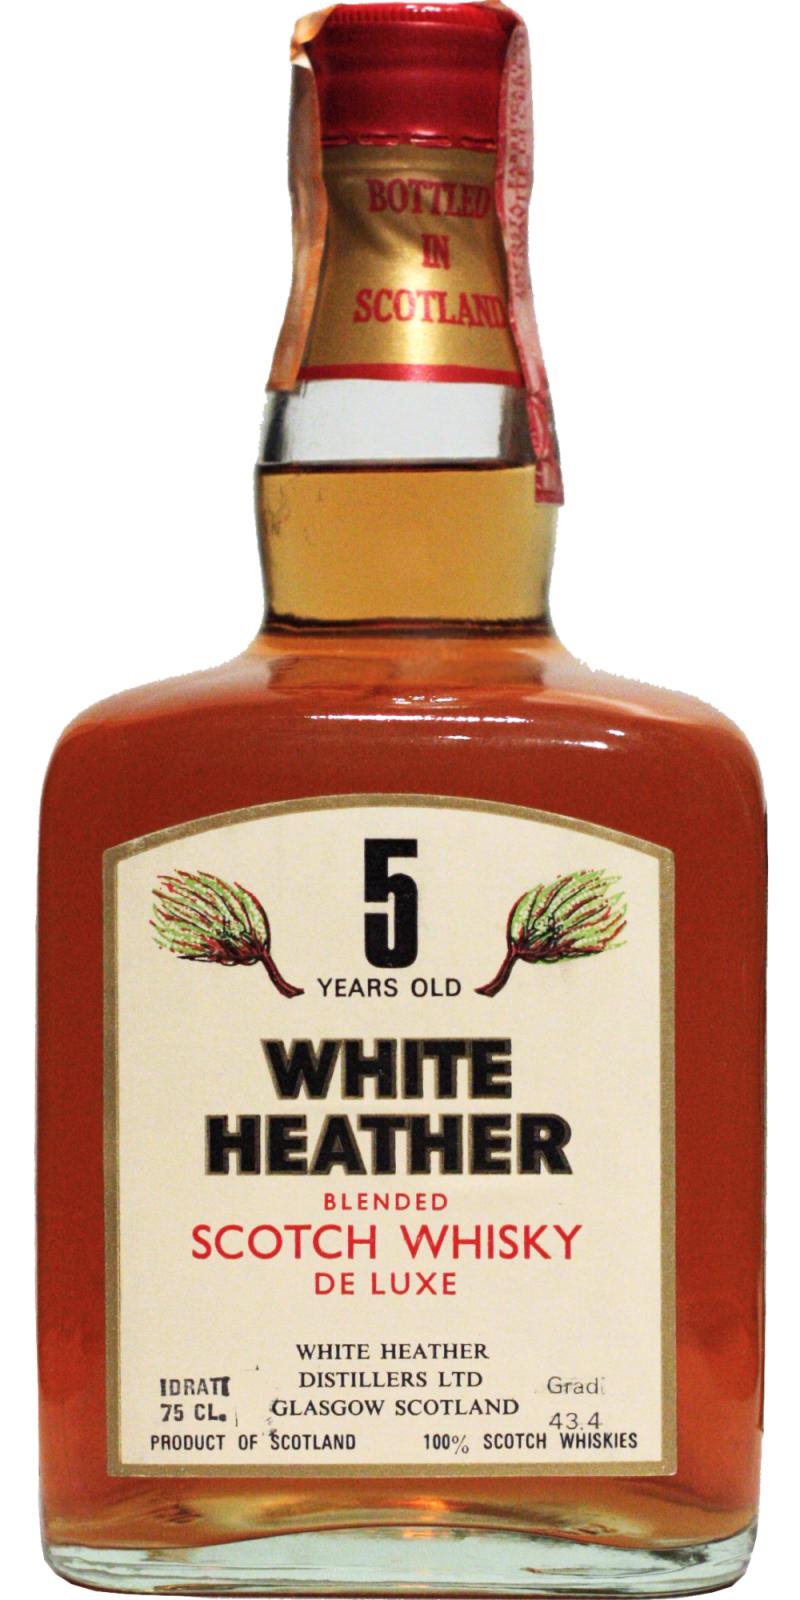 White Heather Blended Scotch Whisky De Luxe 43.4% 750ml